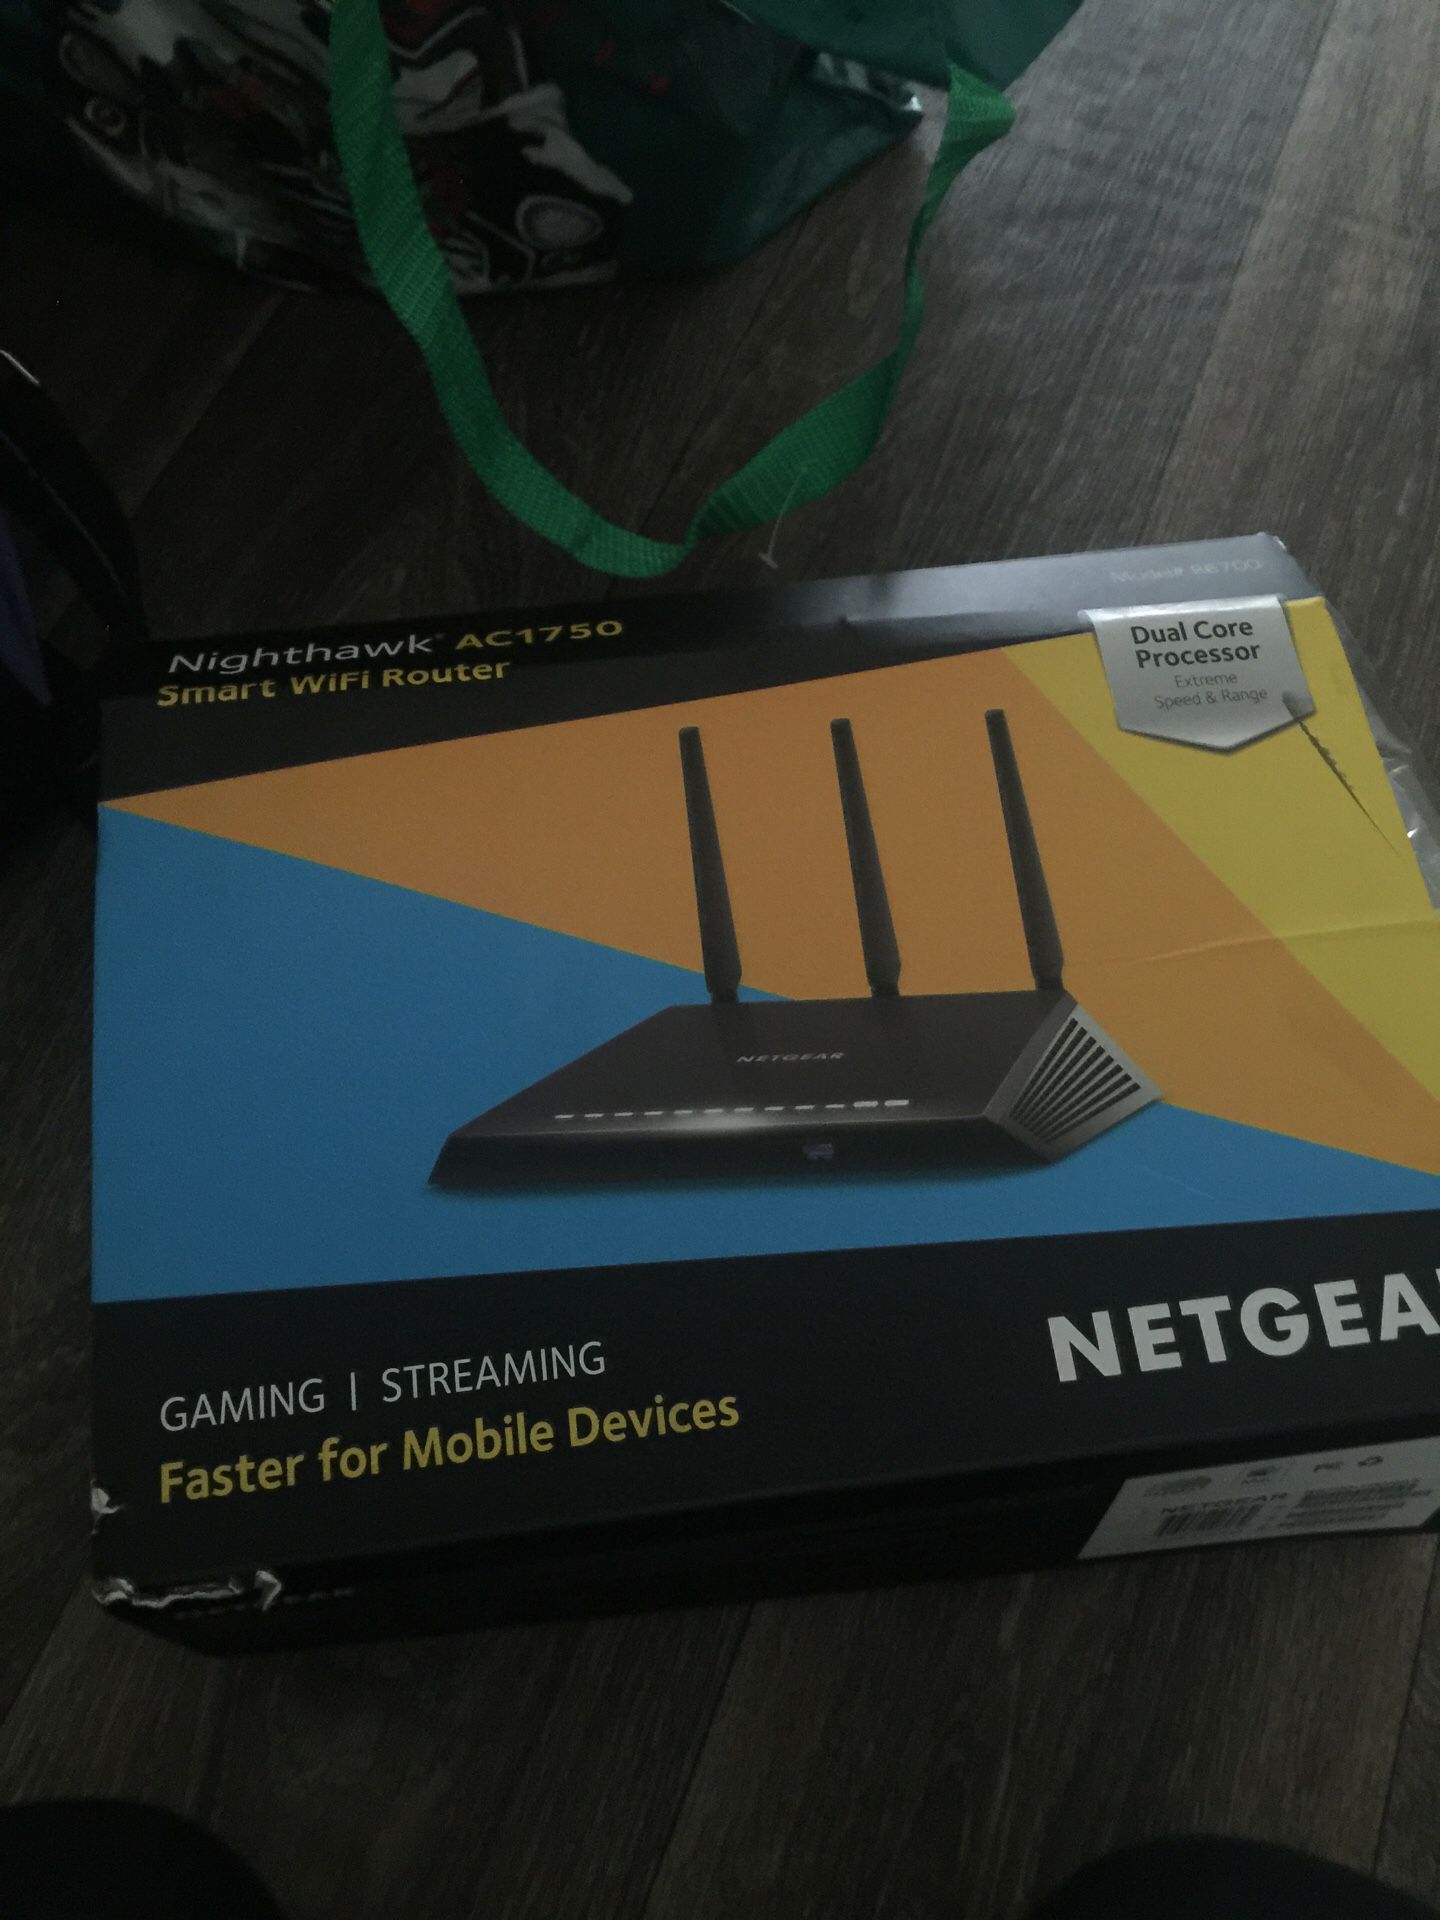 WiFi router for gaming